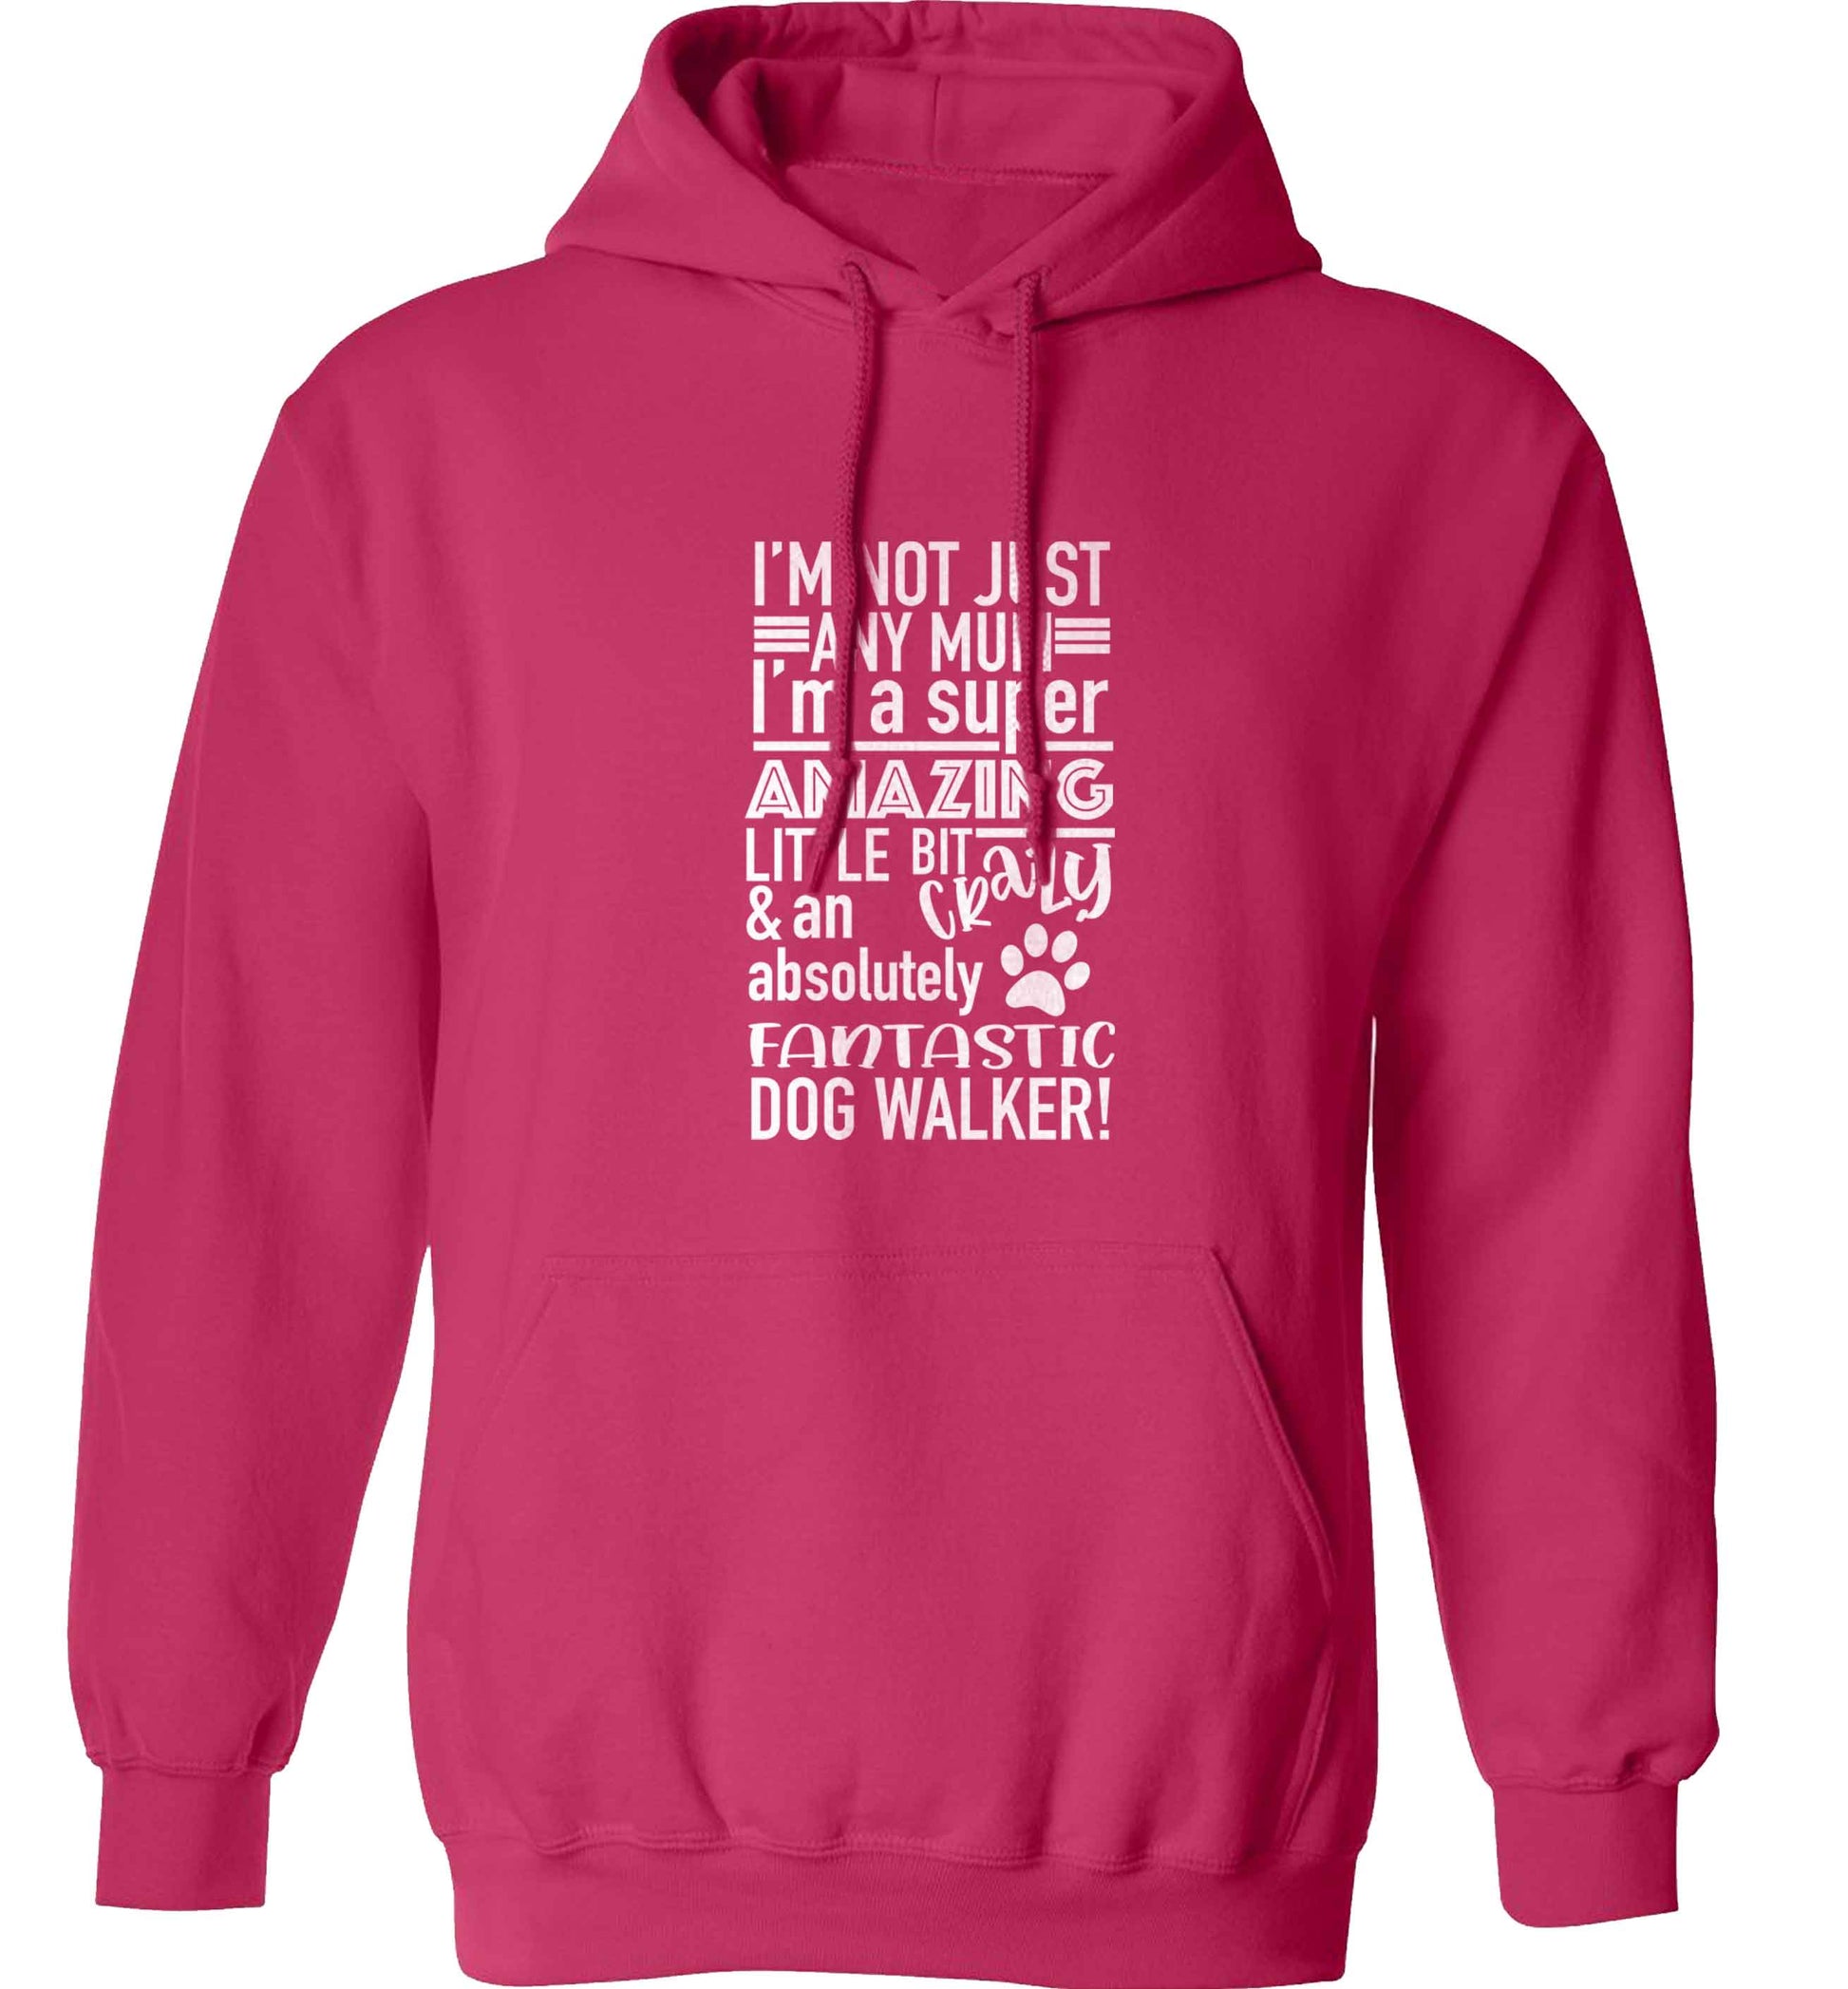 I'm not just any mum I'm a super amazing little bit crazy and an absolutely fantastic dog walker! adults unisex pink hoodie 2XL